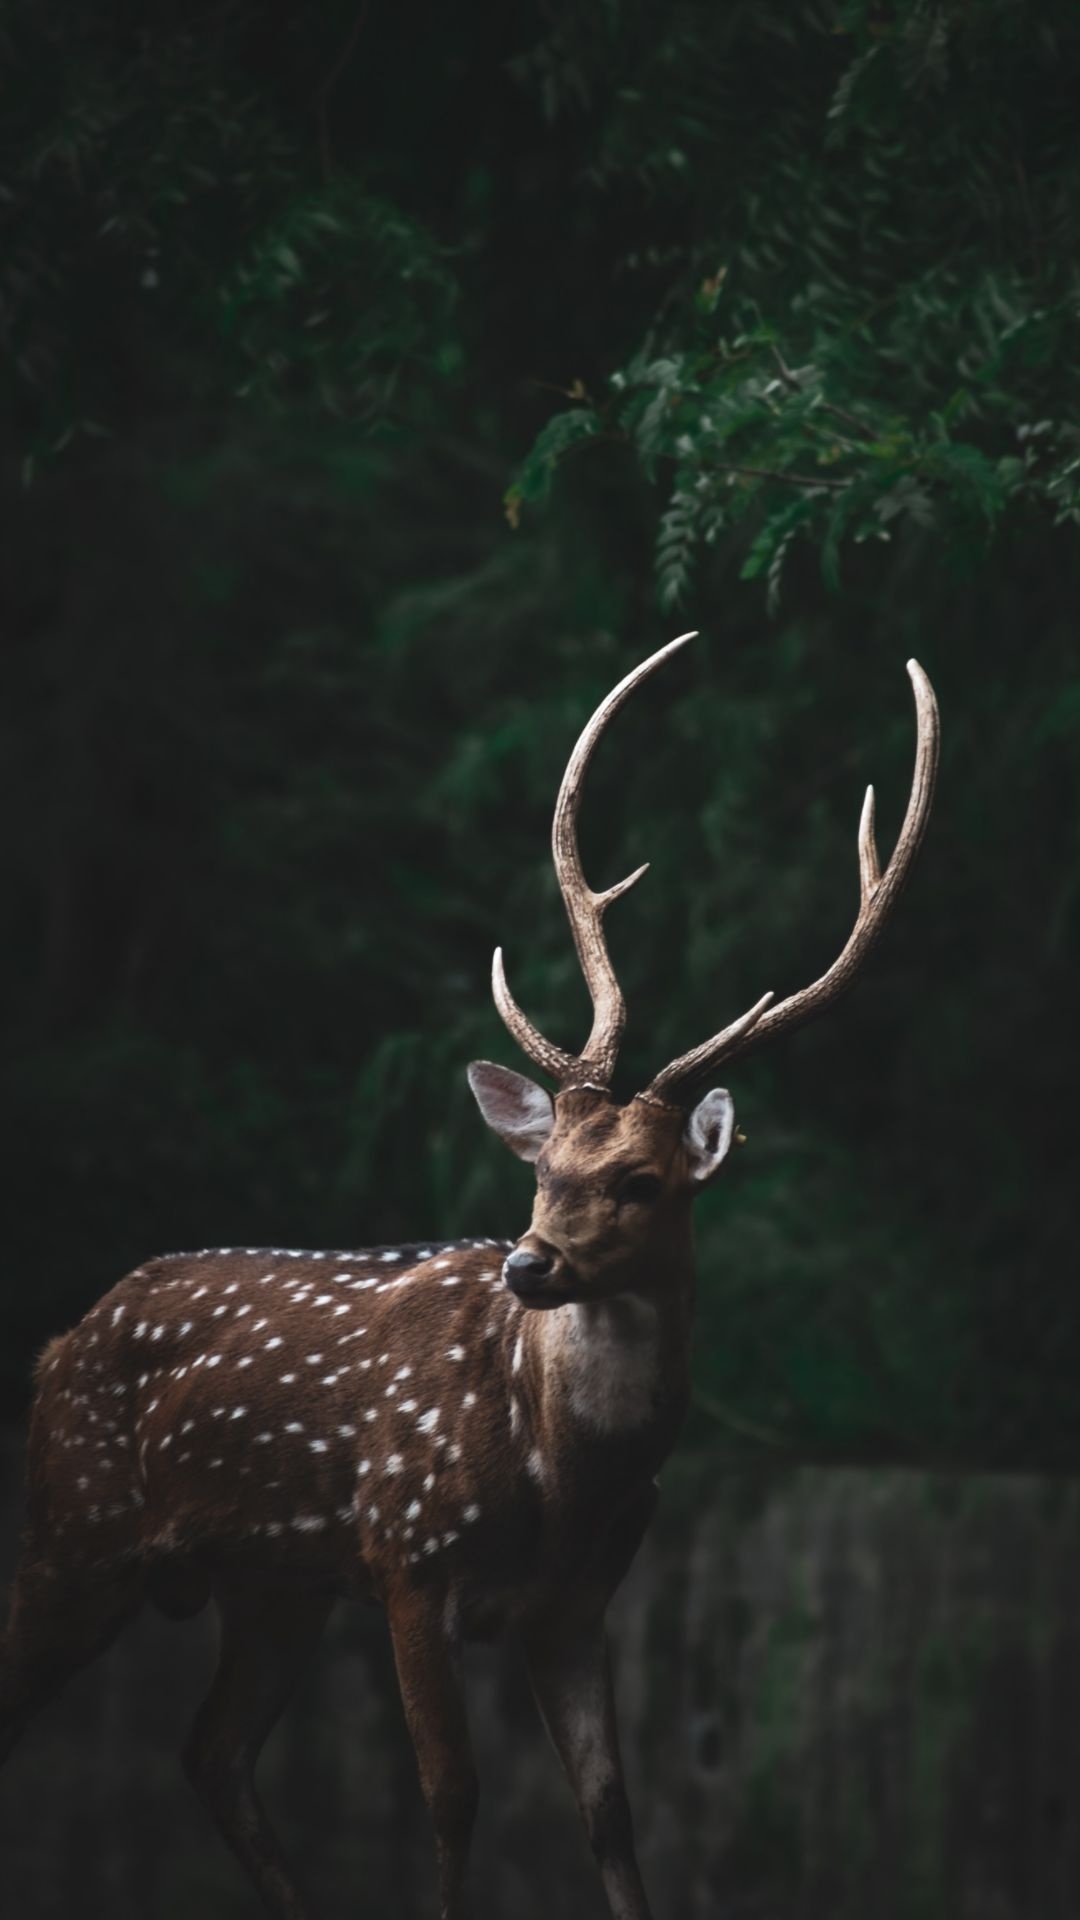 Best deer wallpapers, Breathtaking images, Nature's beauty, Majestic animals, 1080x1920 Full HD Phone